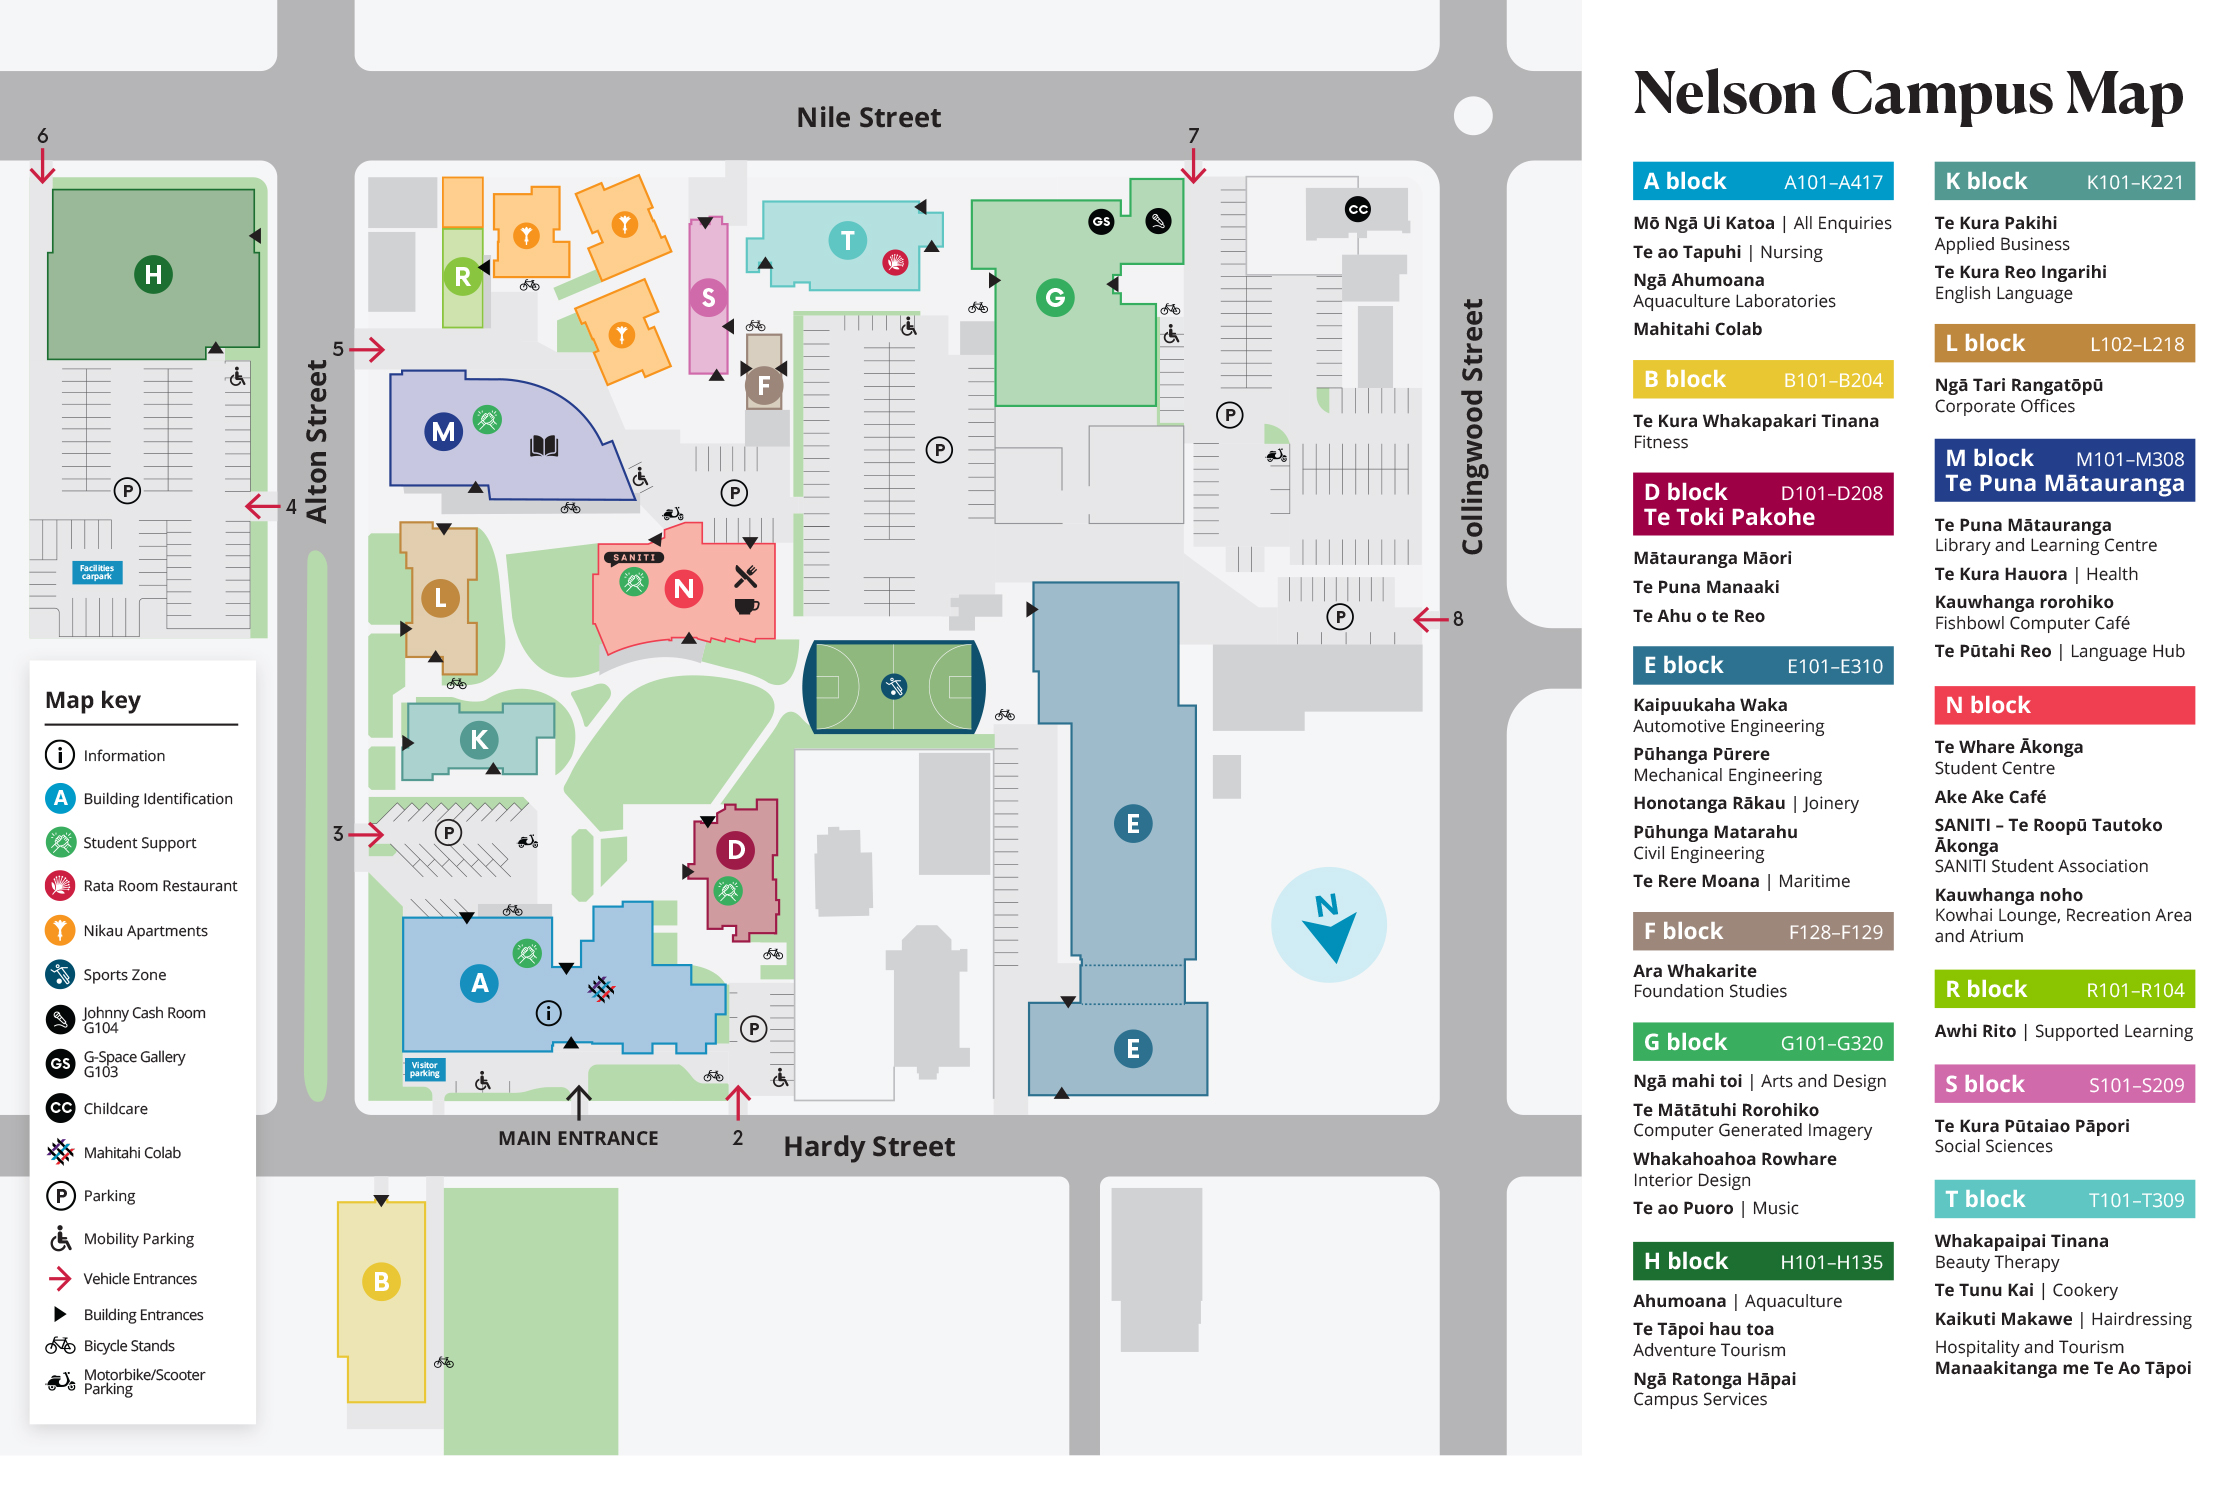 Nelson Campus Map Website Image 2235x1490px 1 v2